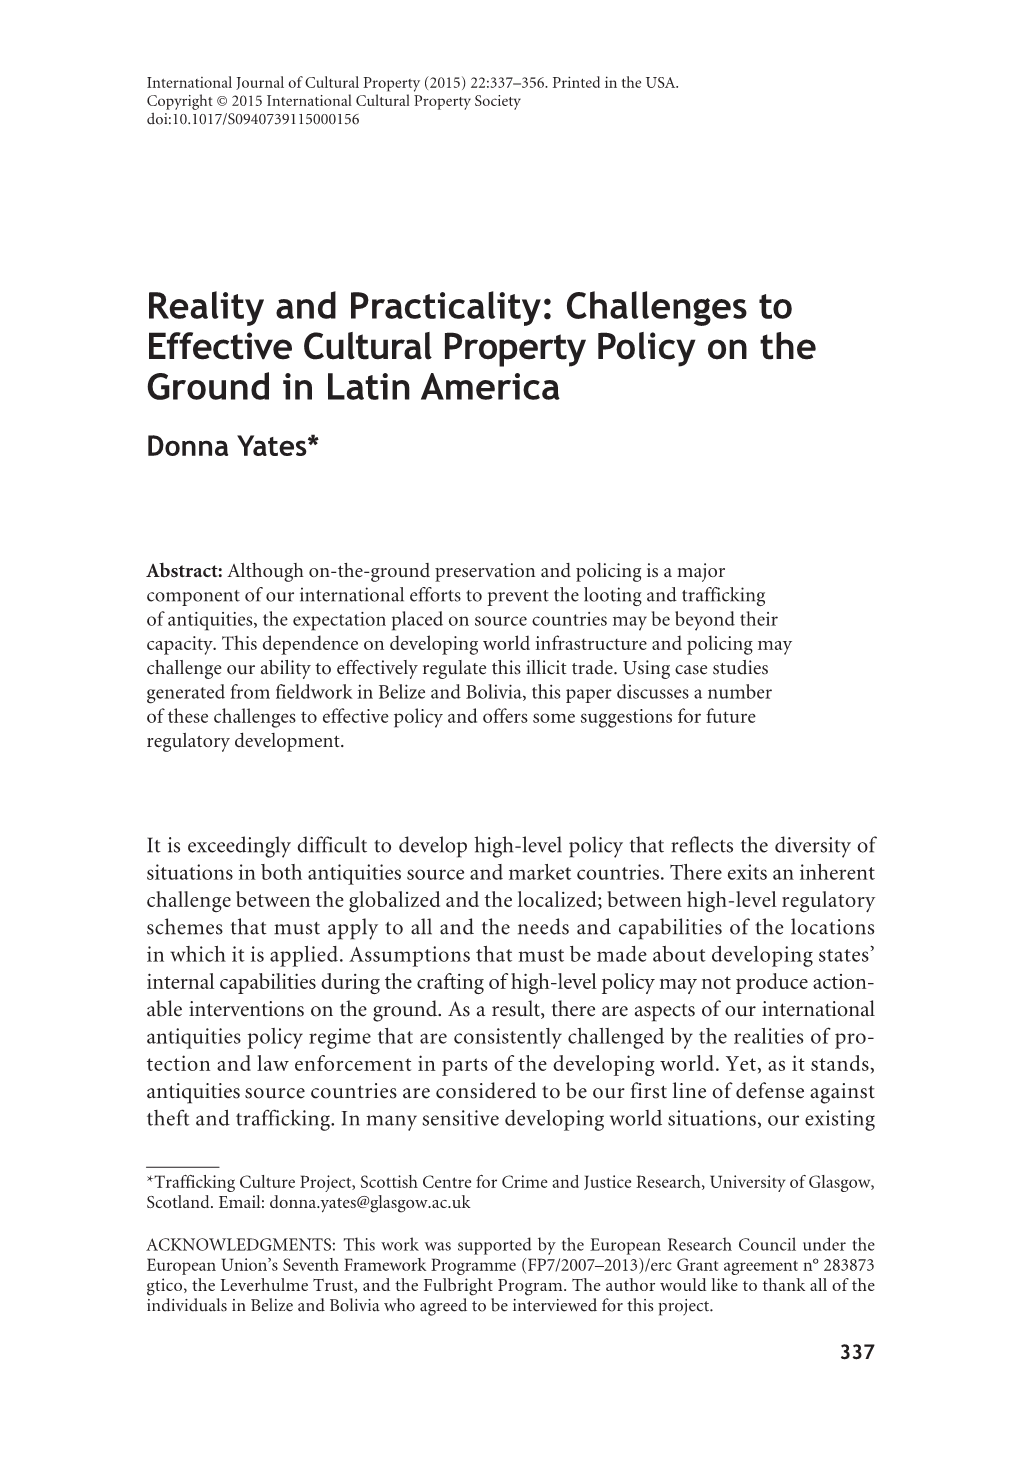 Reality and Practicality: Challenges to Effective Cultural Property Policy on the Ground in Latin America Donna Yates *